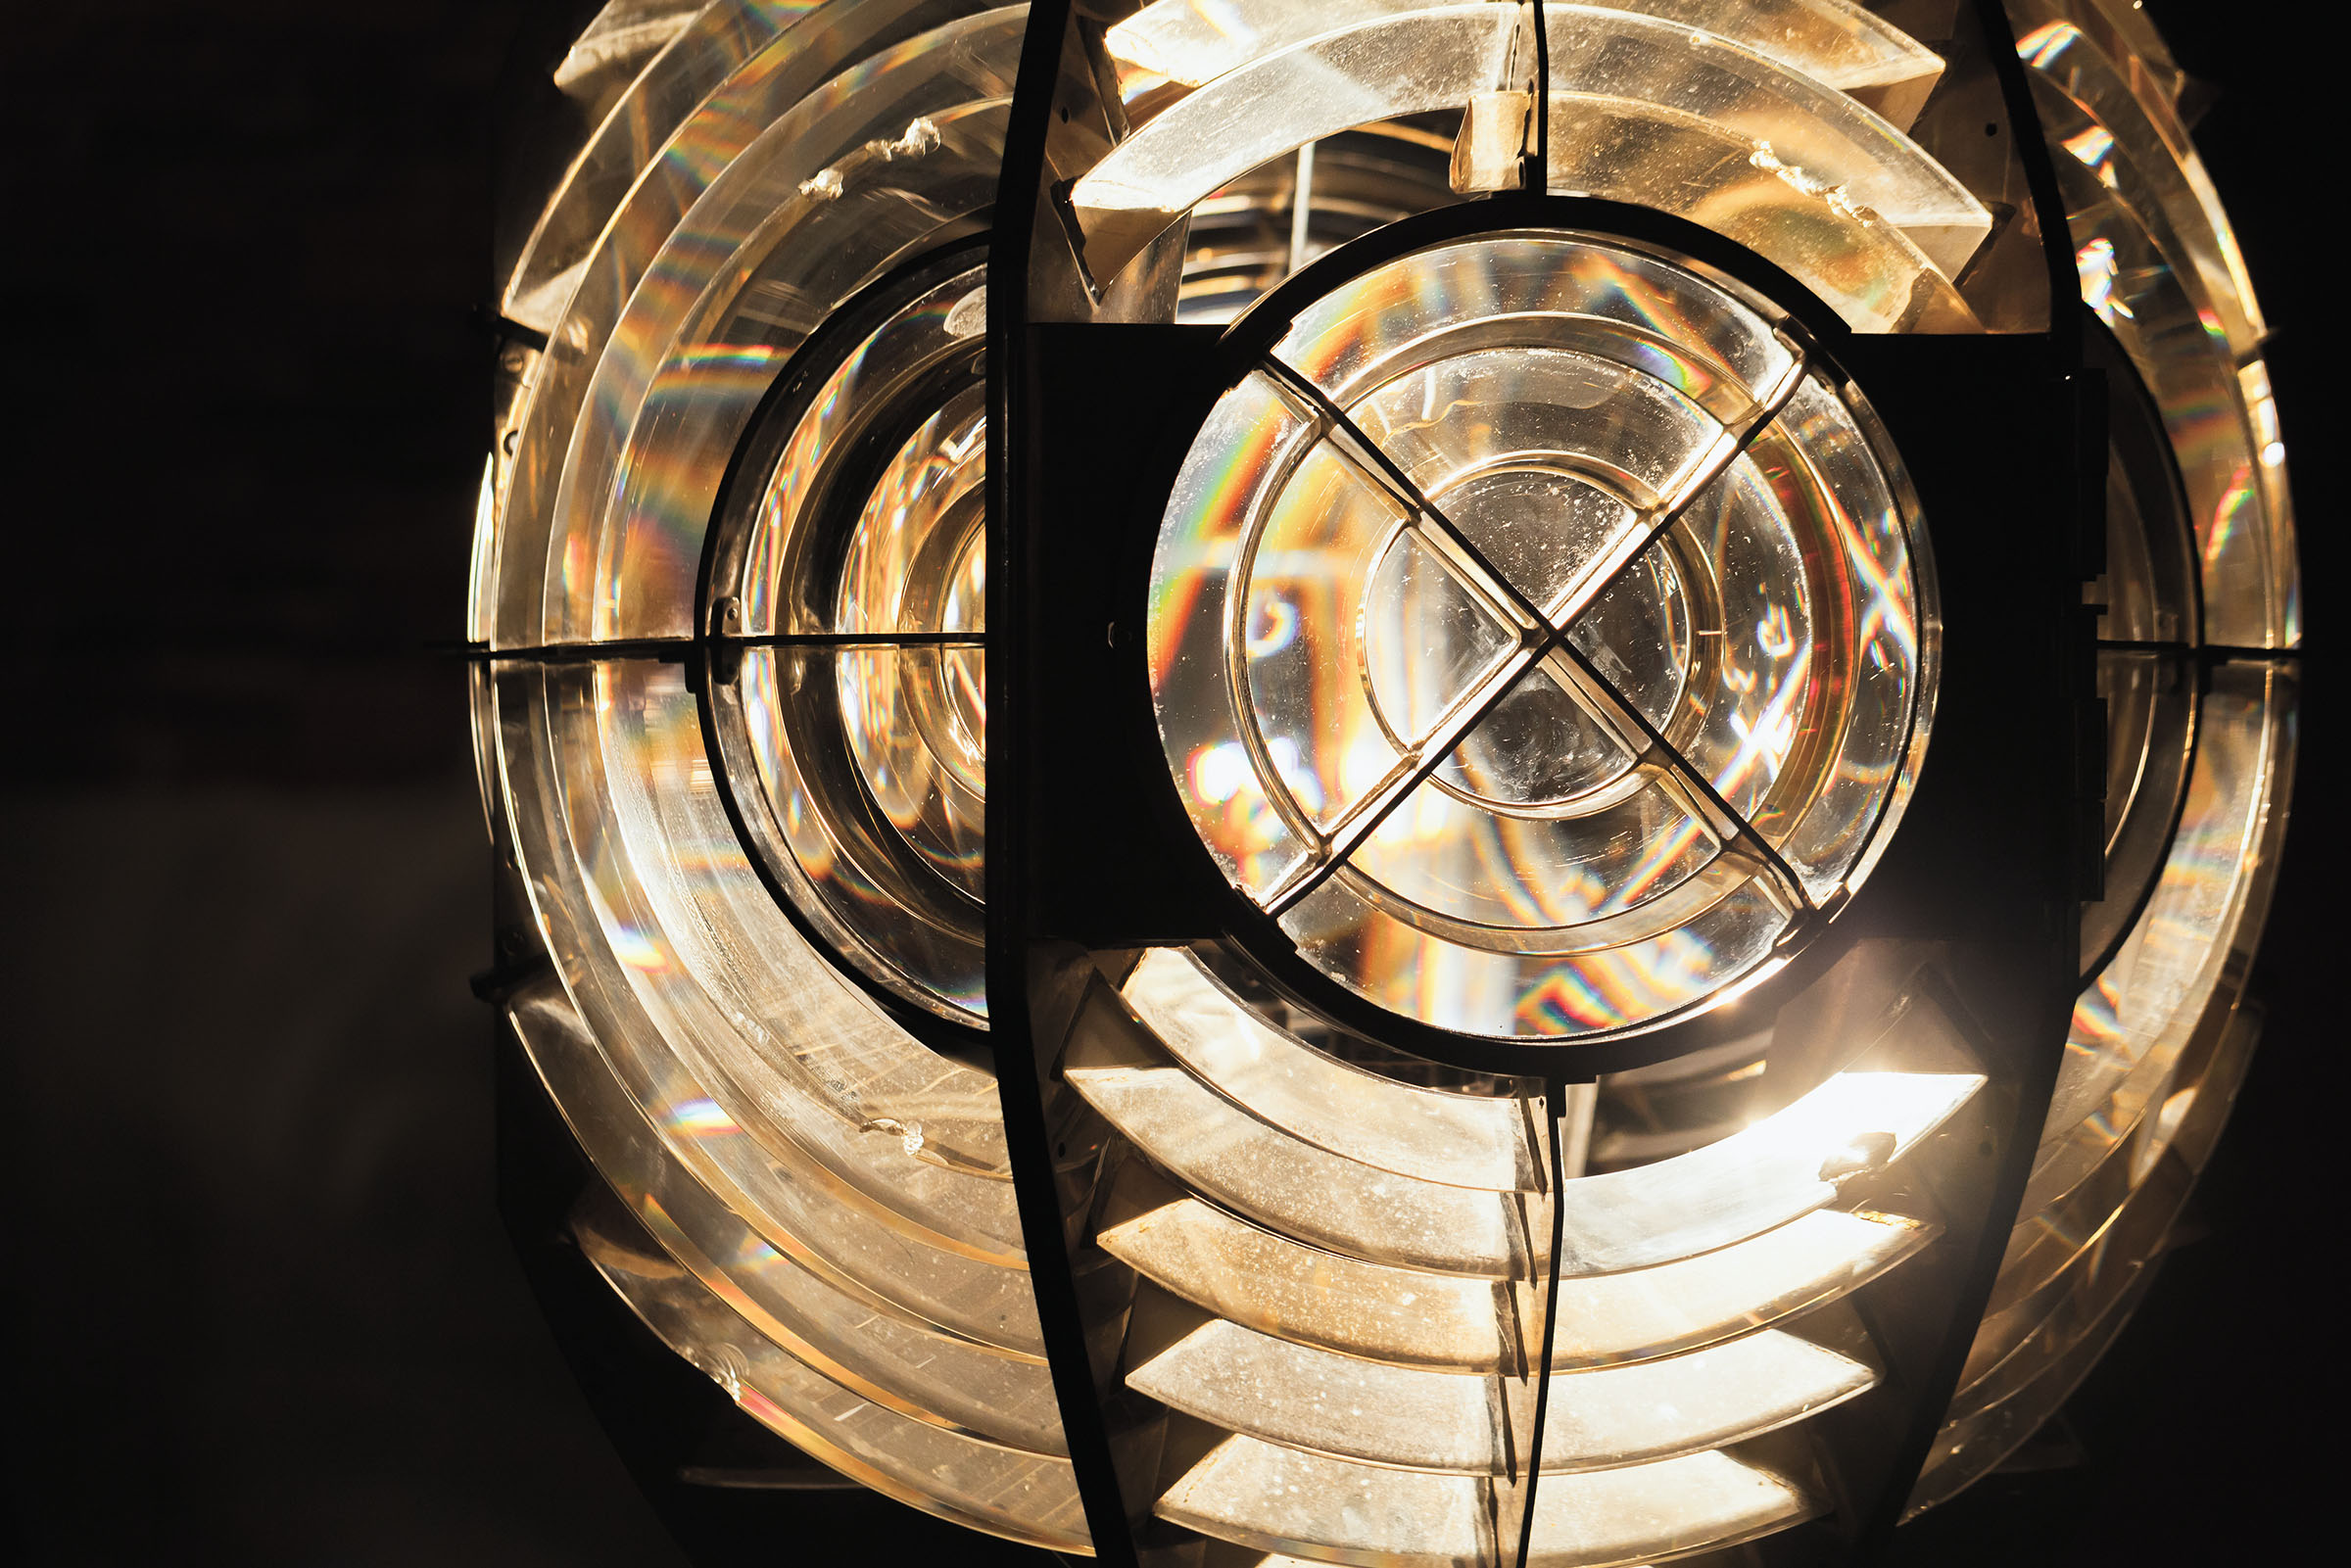 Close up photo.of a ;ighthouse lamp with a Fresnel lens. It is a type of composite compact lens developed by the French physicist Augustin-Jean Fresnel for use in lighthouses